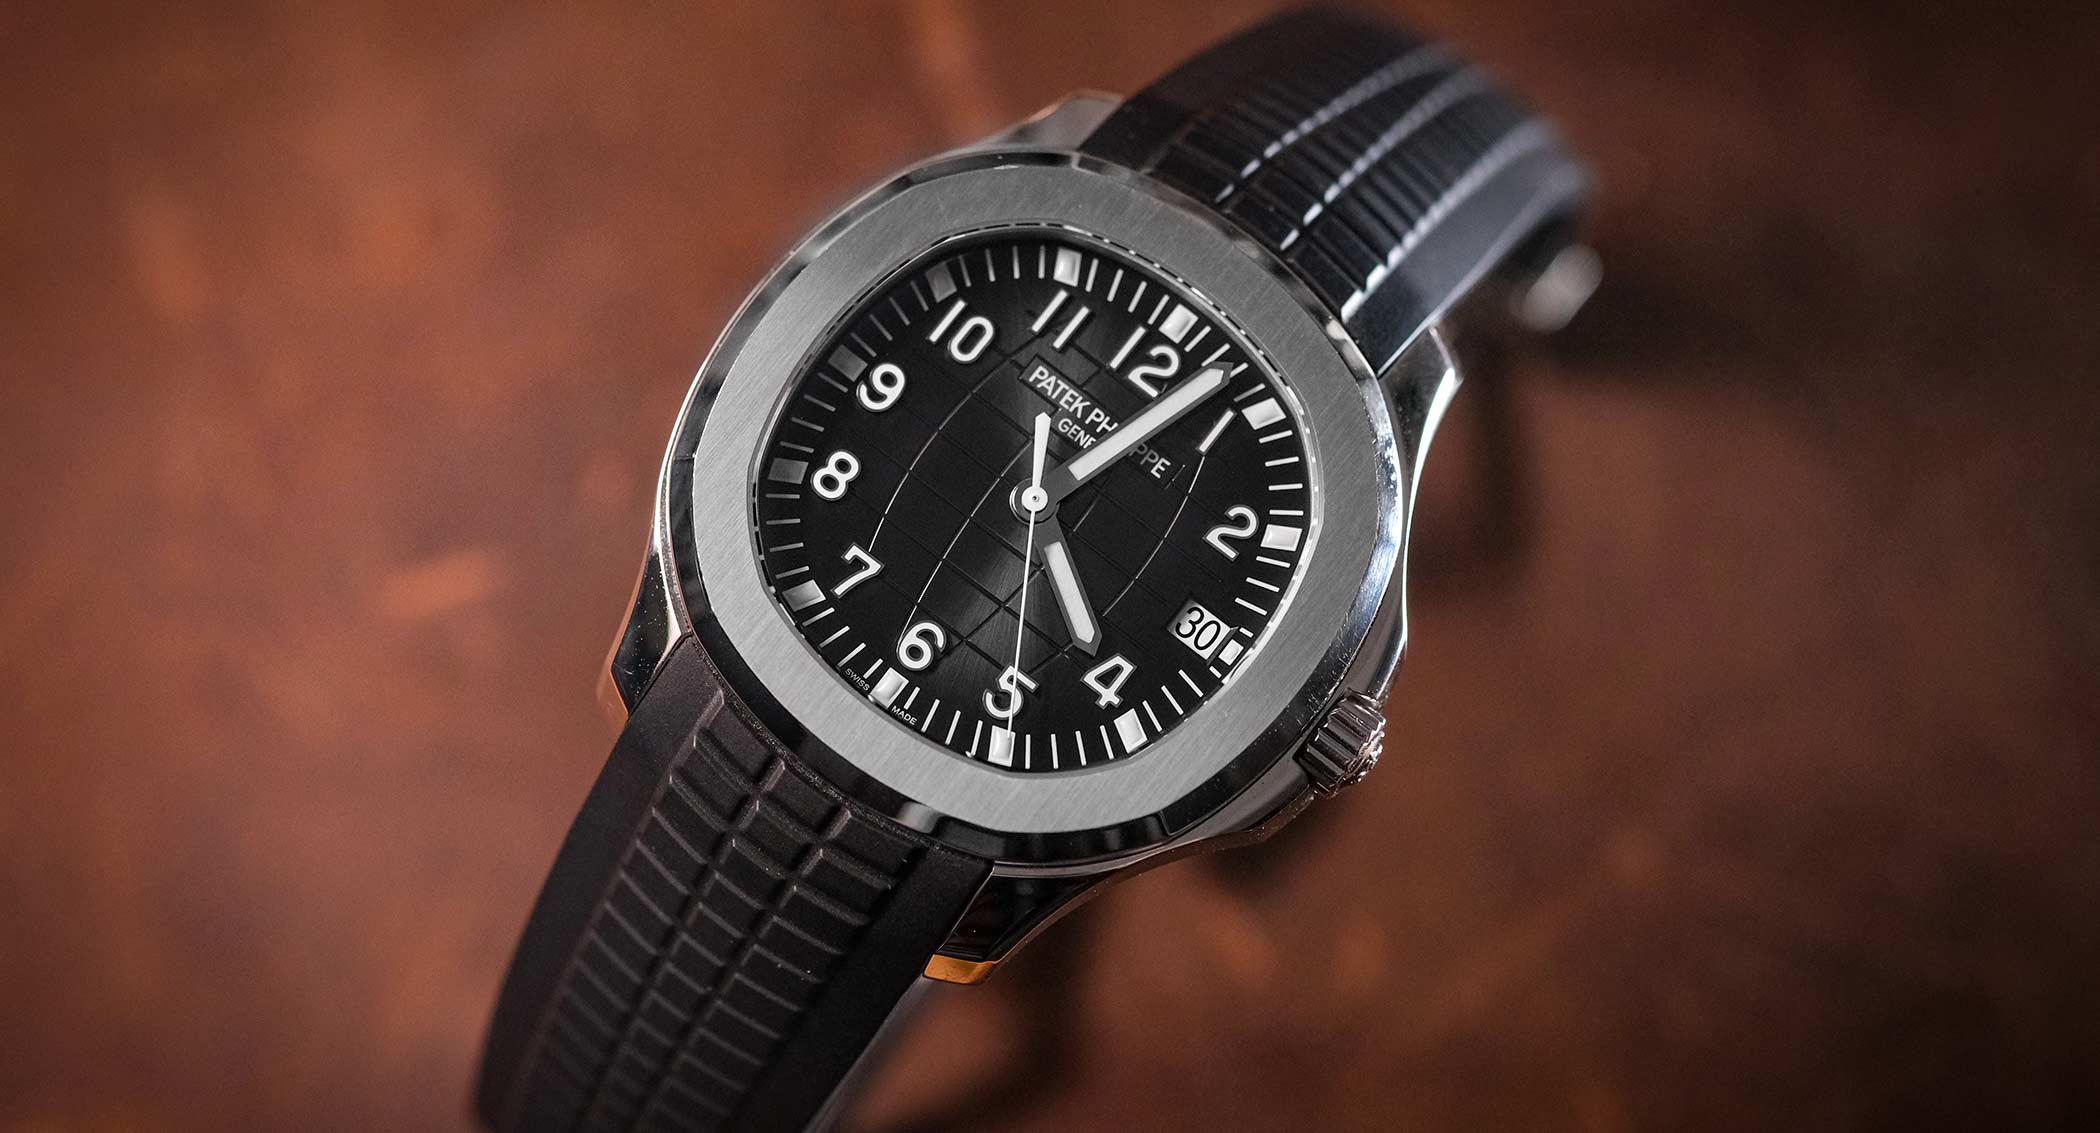 Patek Philippe Aquanaut 5167 Review: Modern, Sporty and Chic